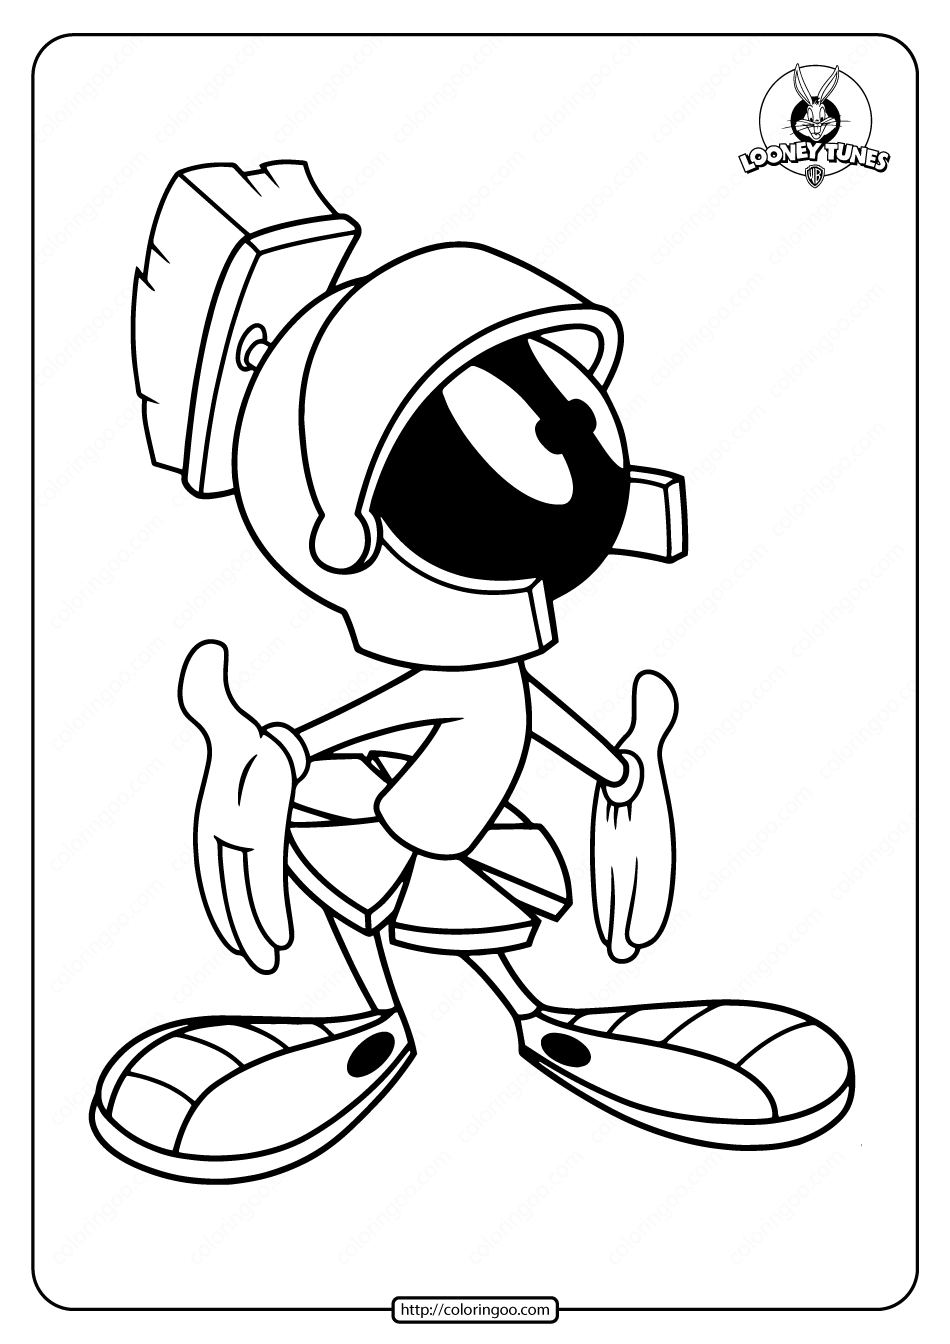 printable marvin the martian coloring page